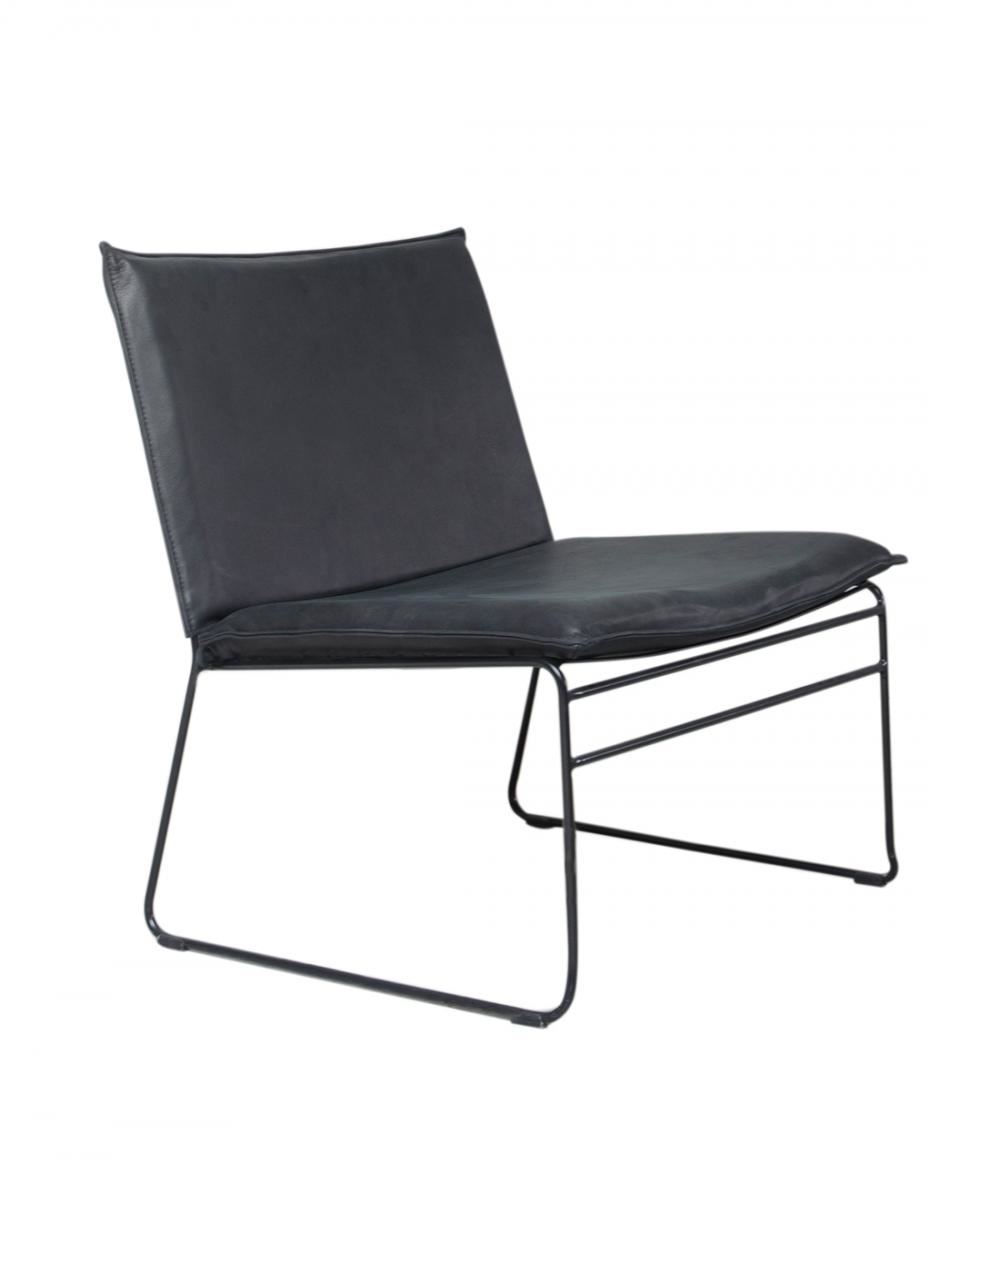 Kyst Lounge Chair Outdoor Lounge Chair With Black Cushion None